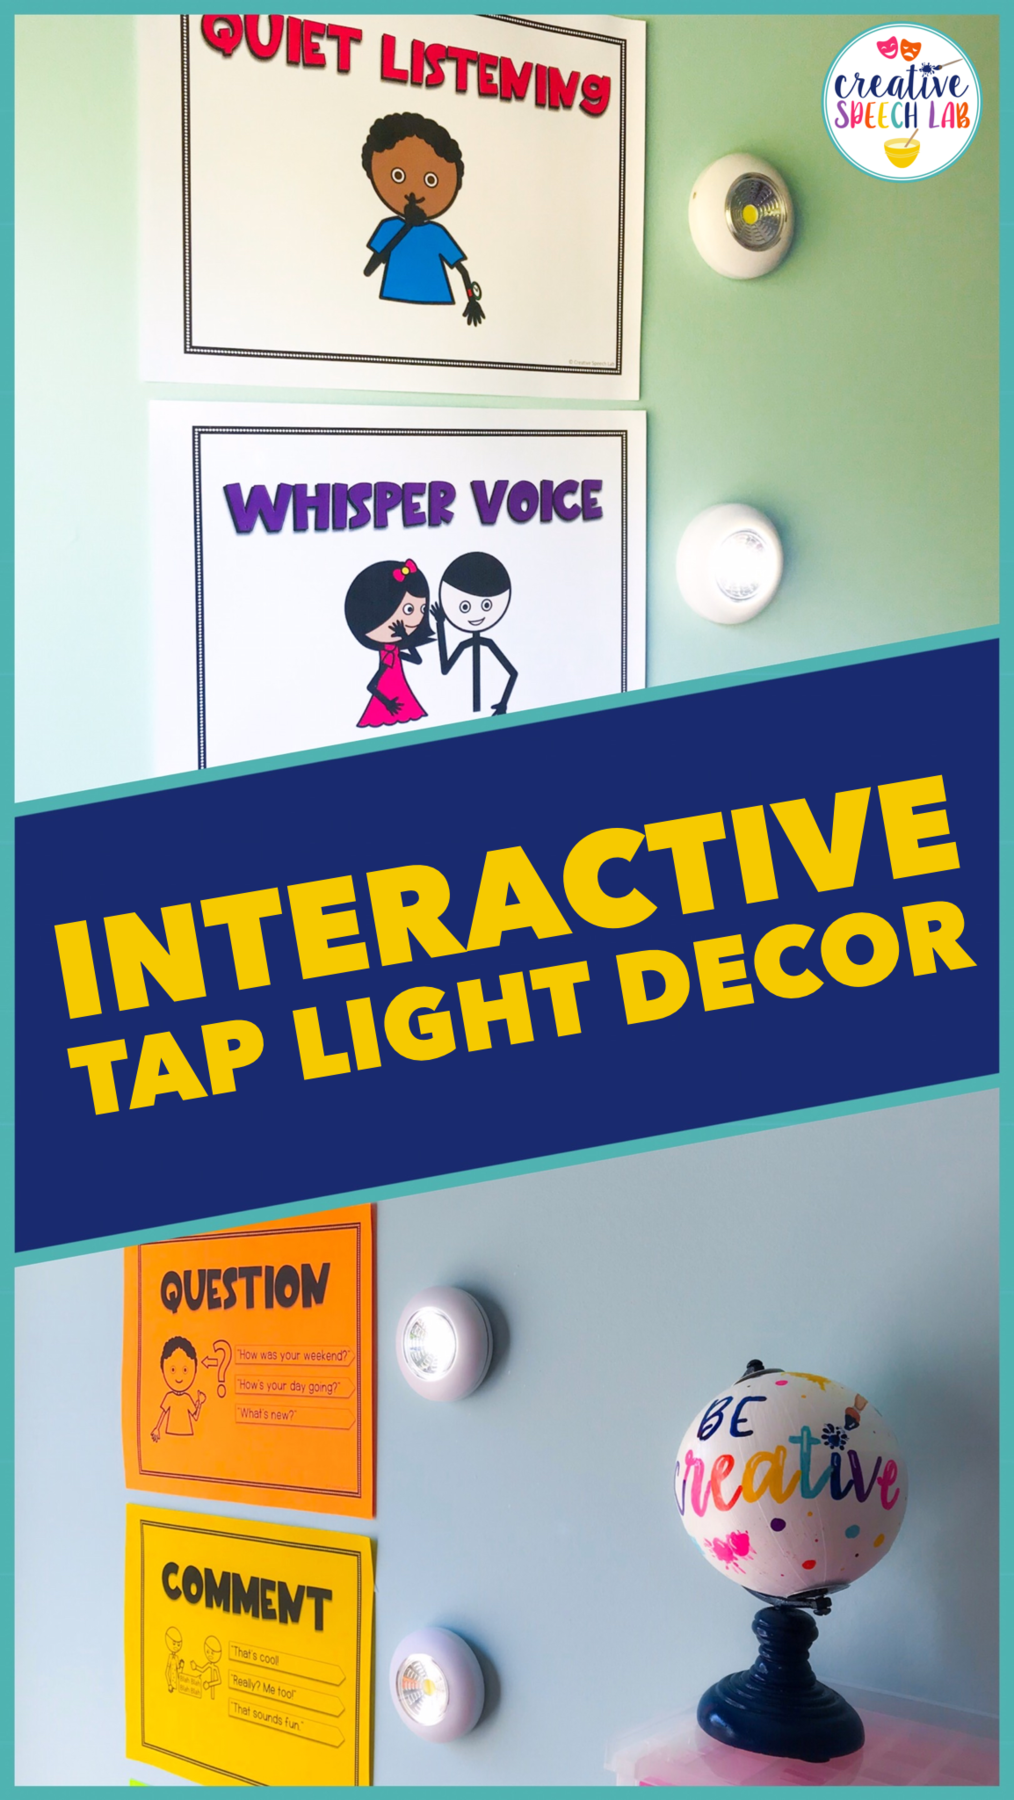 Interactive speech therapy room decor display with tap lights